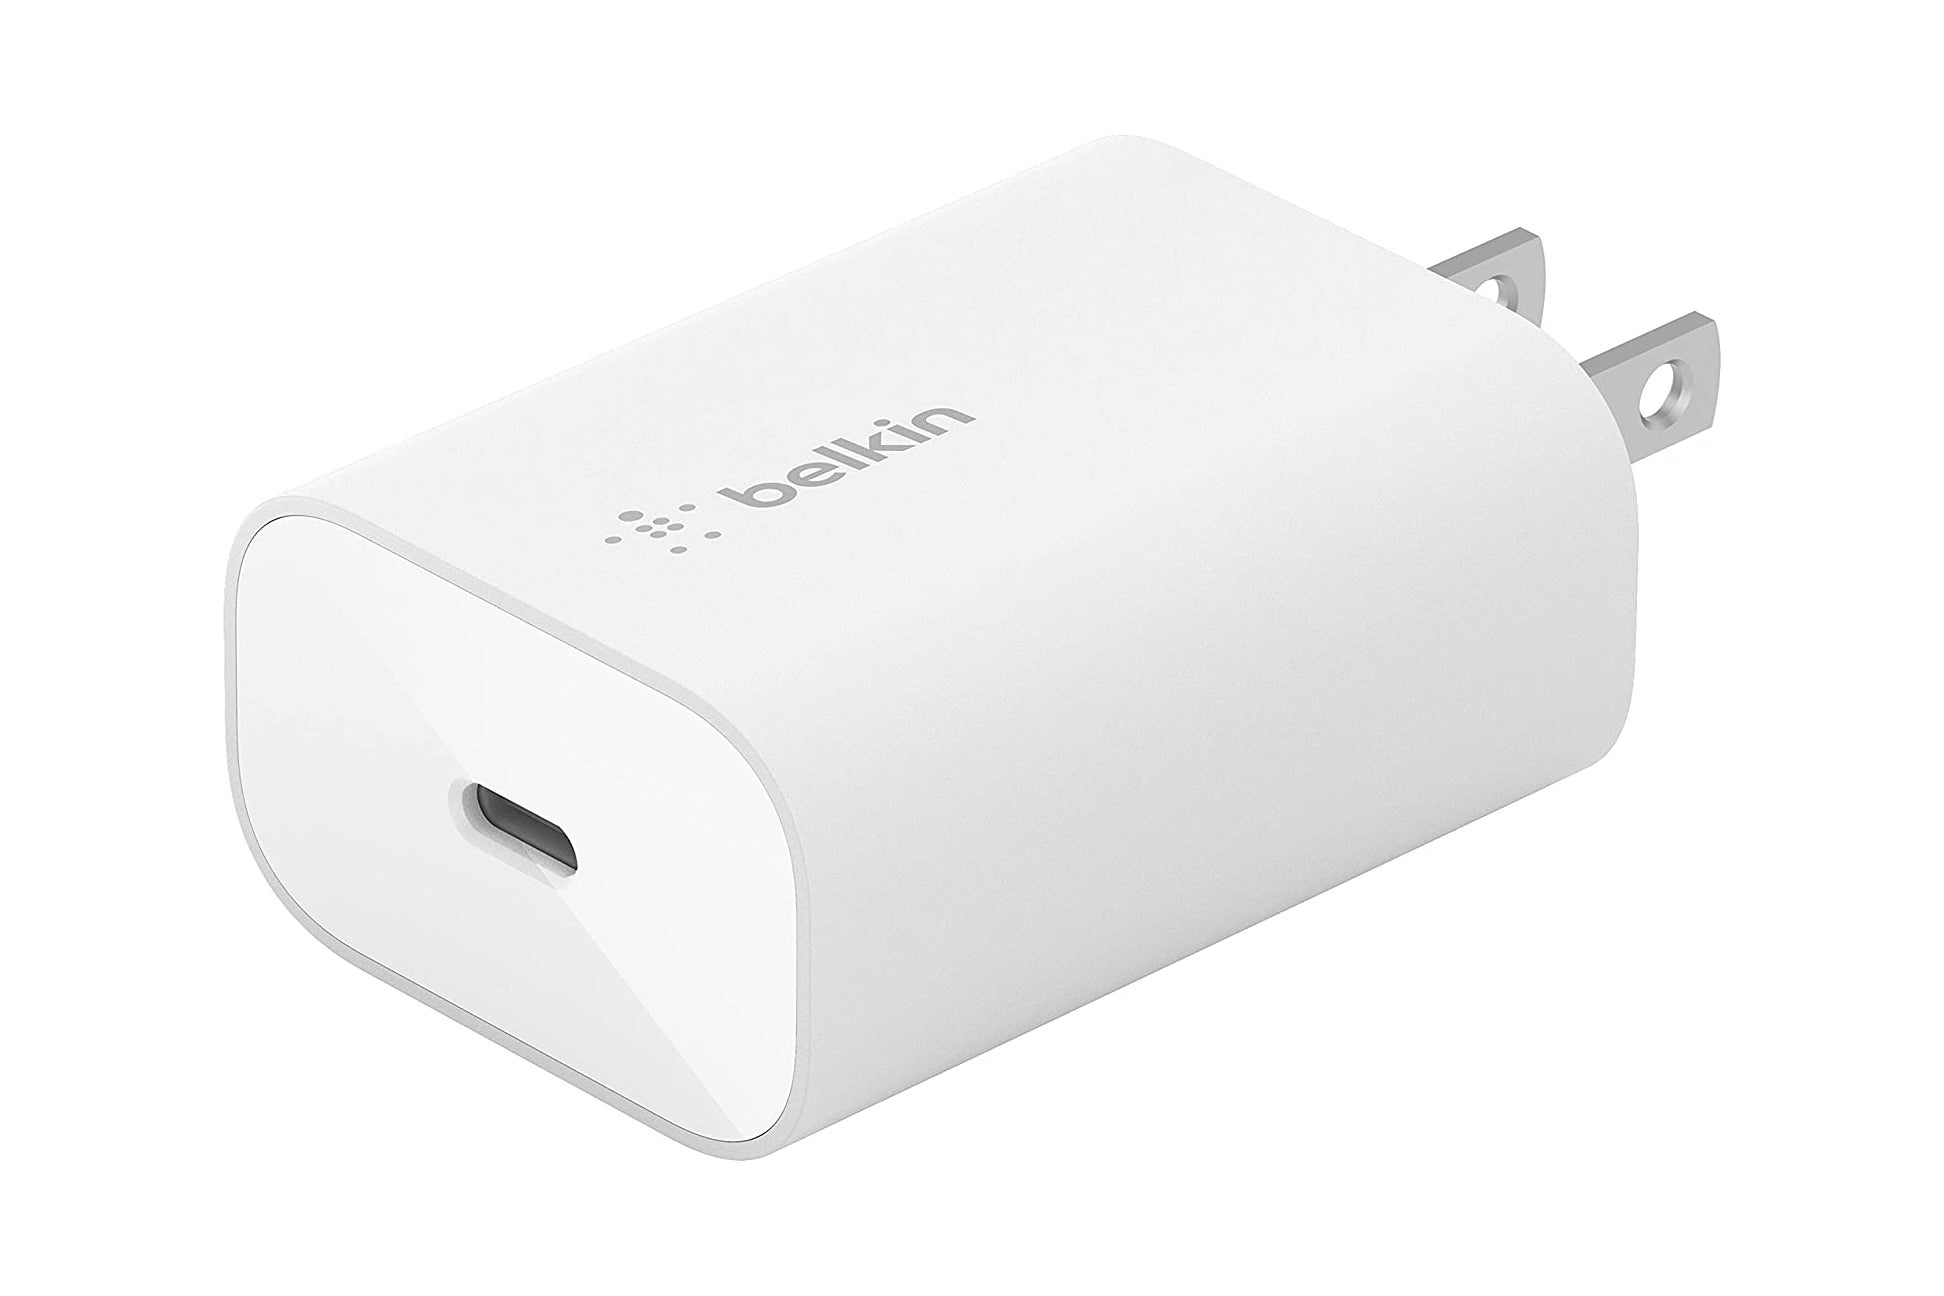 Best Samsung Galaxy Z Fold 3 chargers